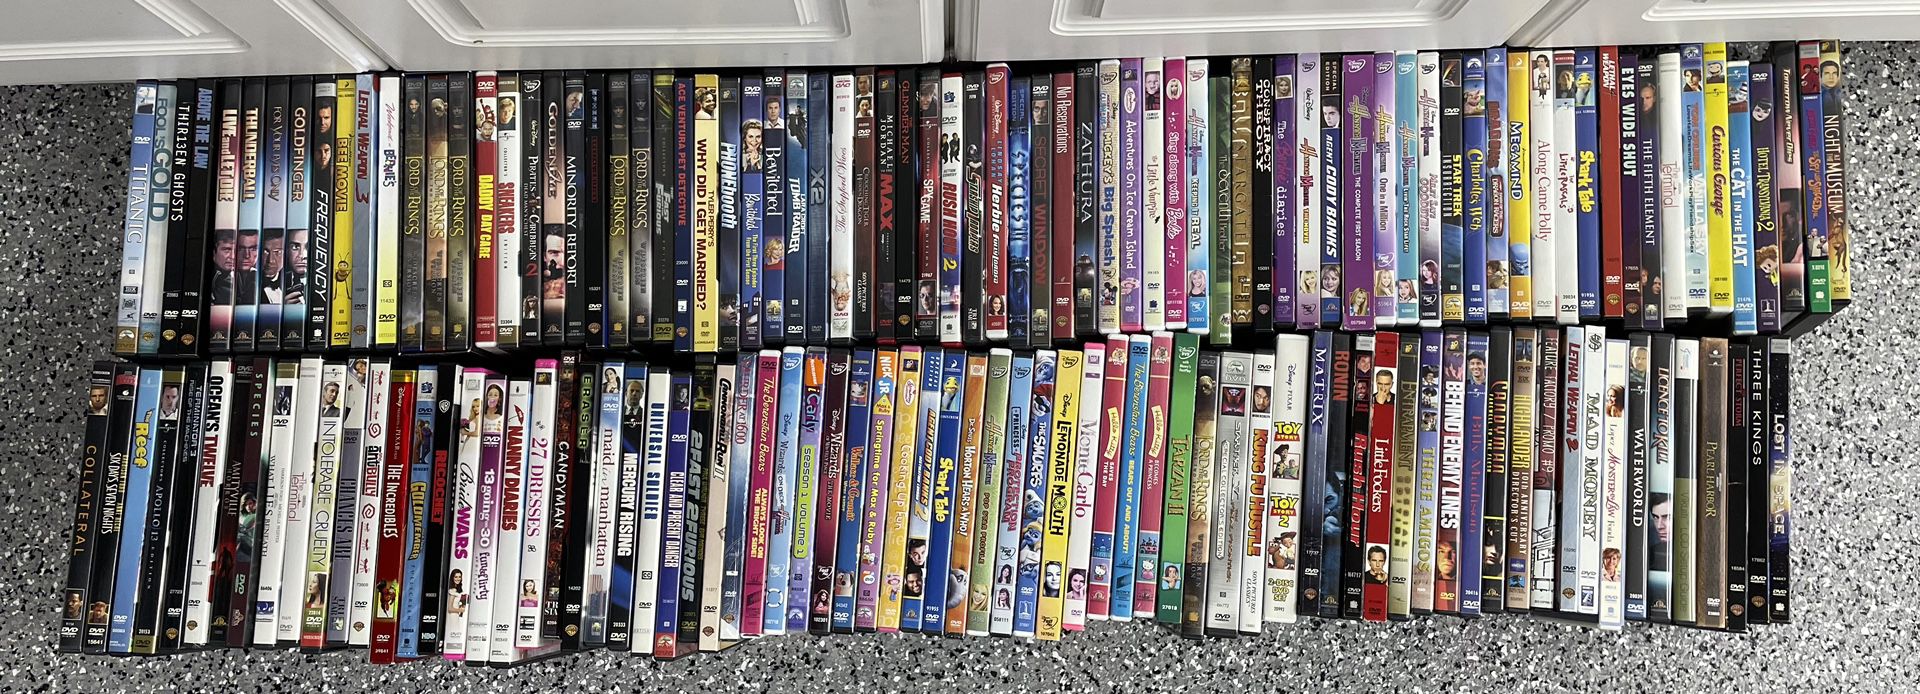 Collection of 149 DVDs